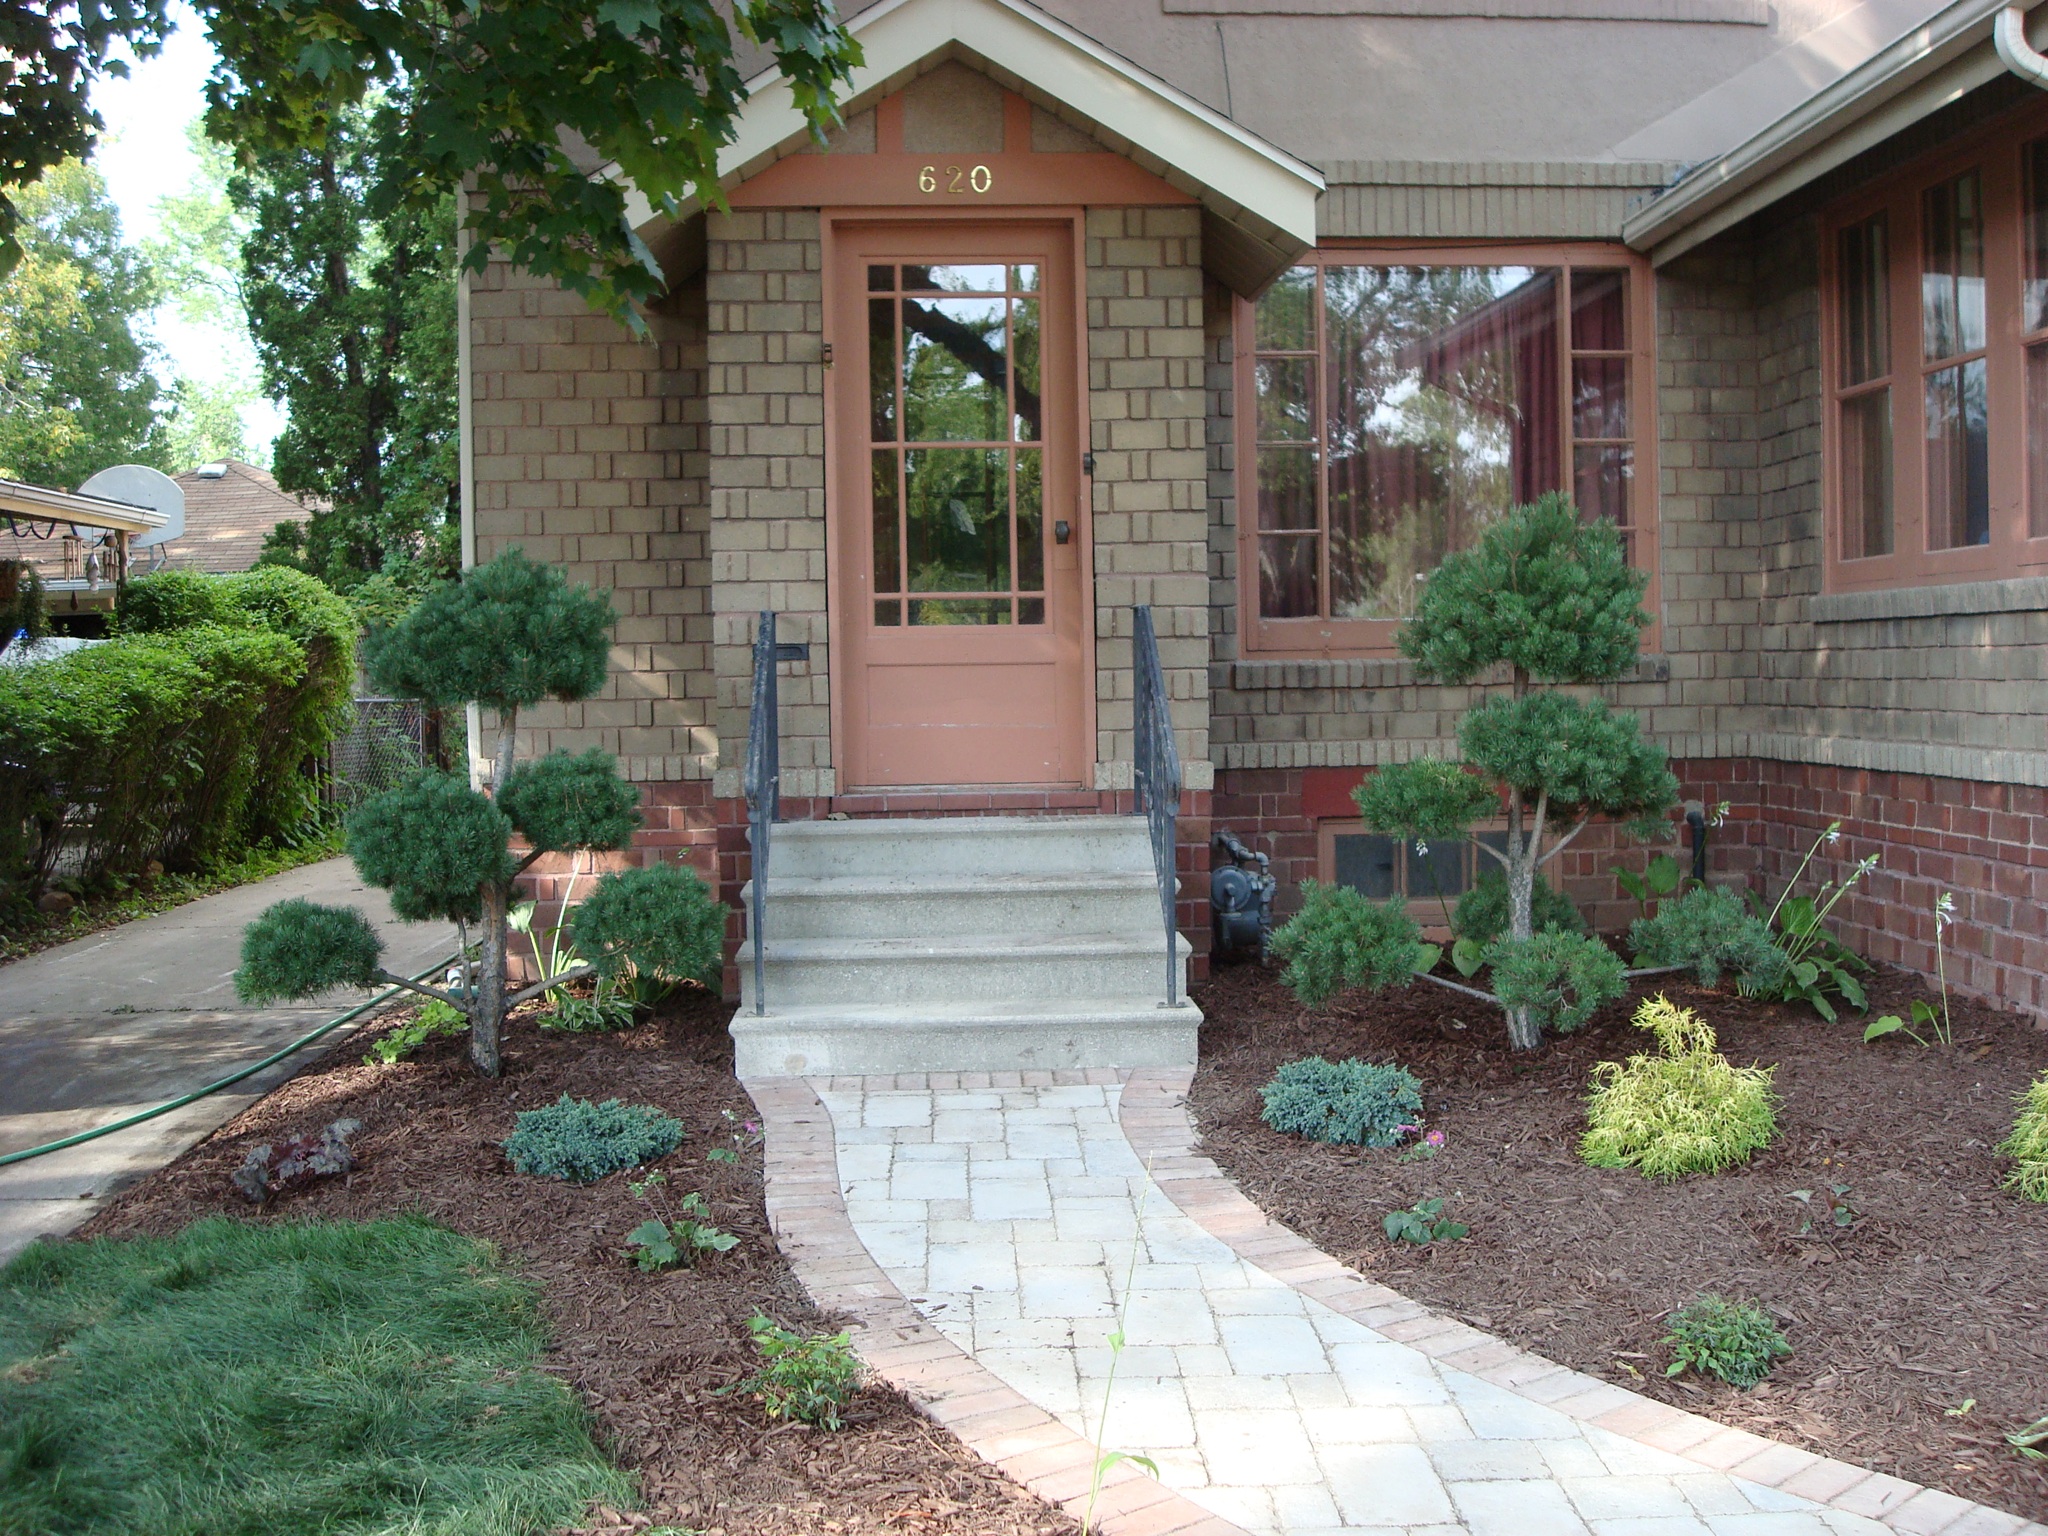 front door surrounded by decorative trees and plants in mulched area around walkway